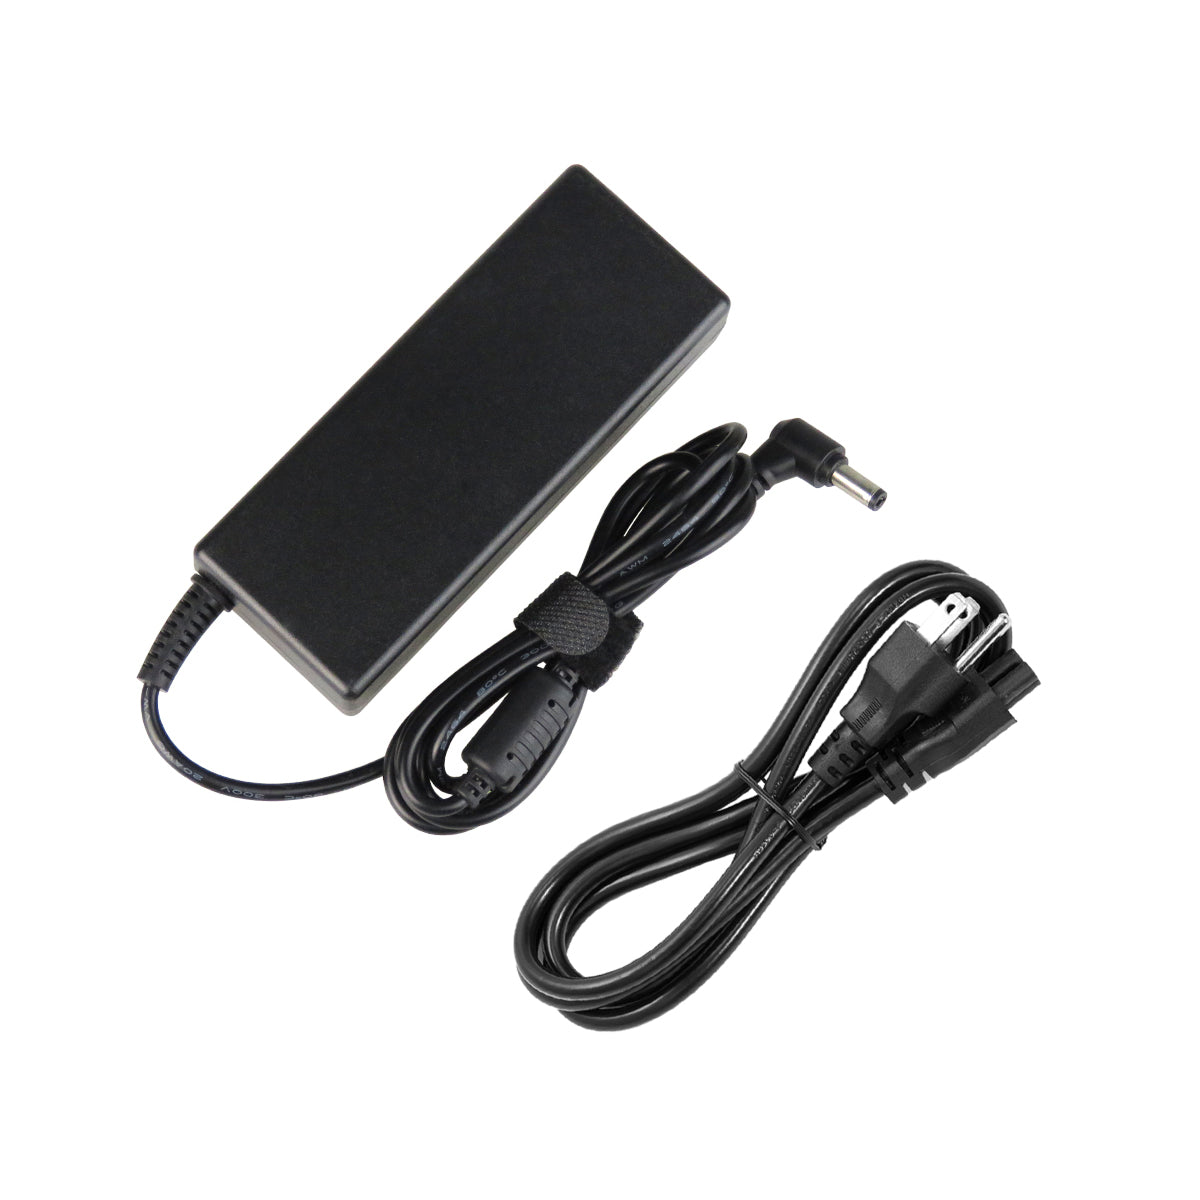 AC Adapter Charger for ASUS F75 Notebook.